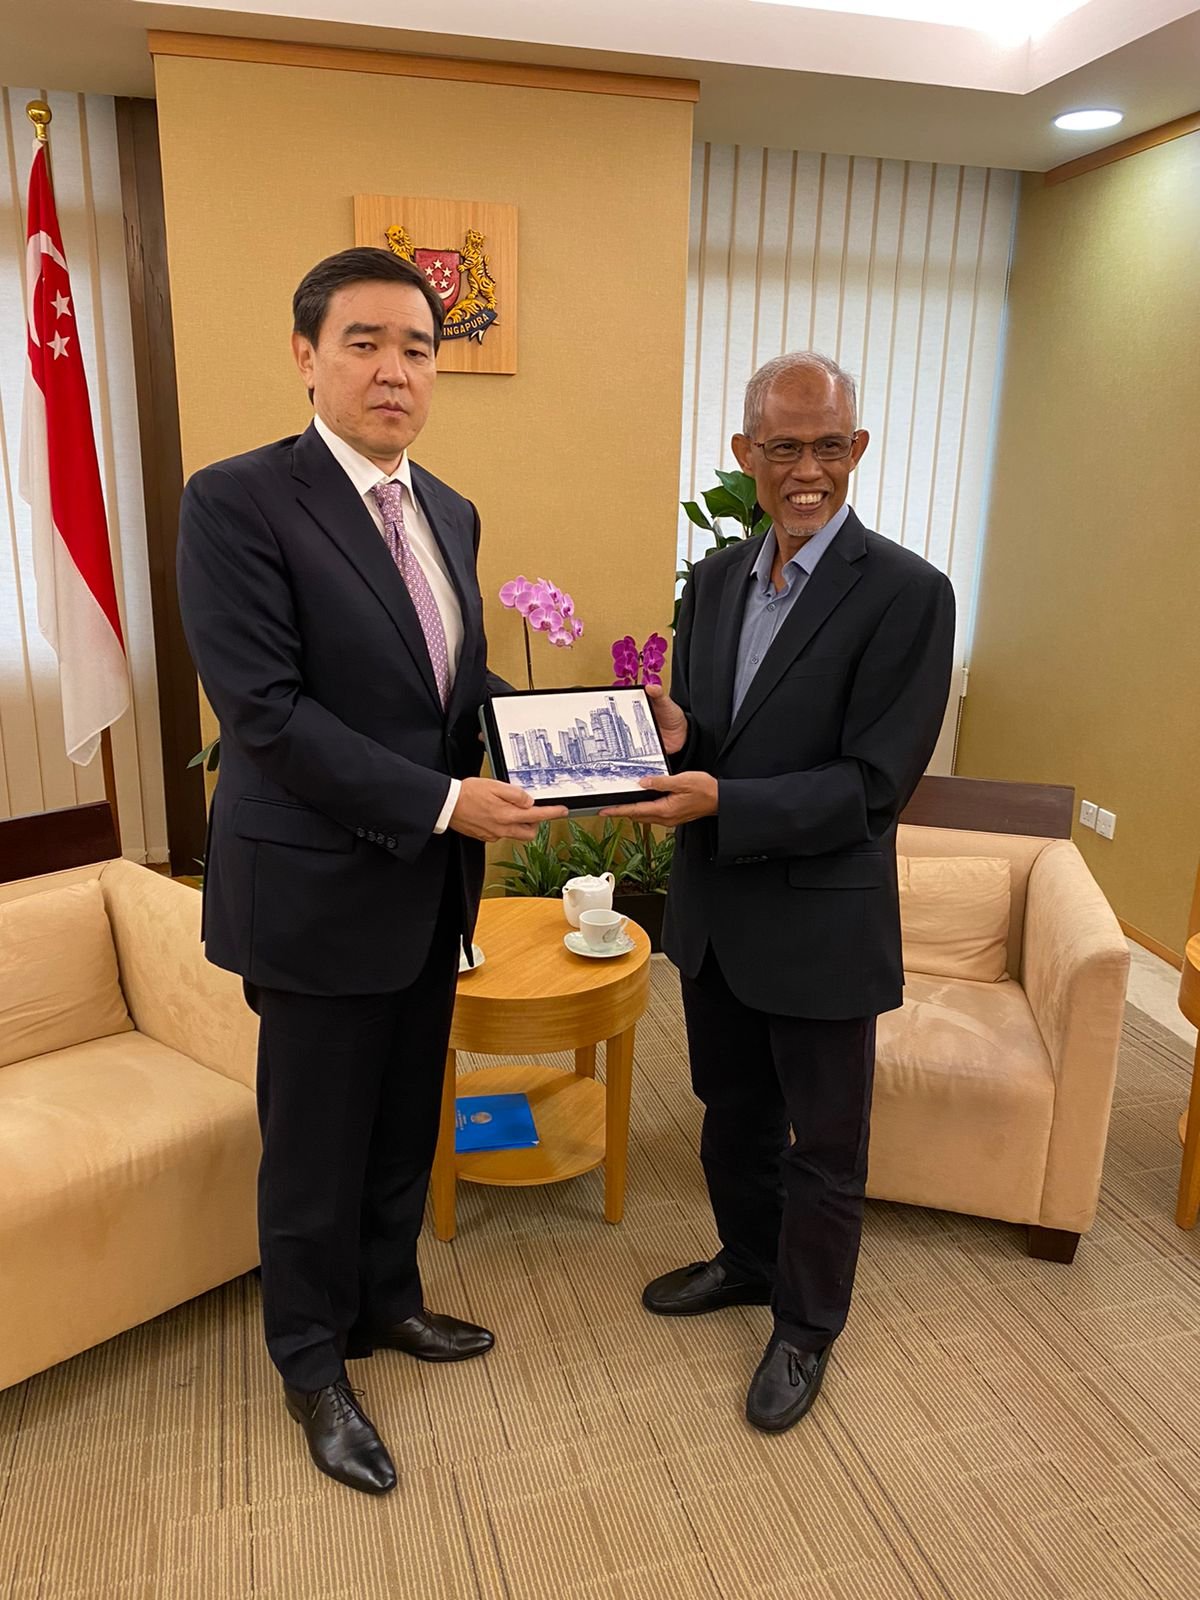 Meeting with Minister-in-charge of Muslim Affairs of Singapore Masagos Zulkifli